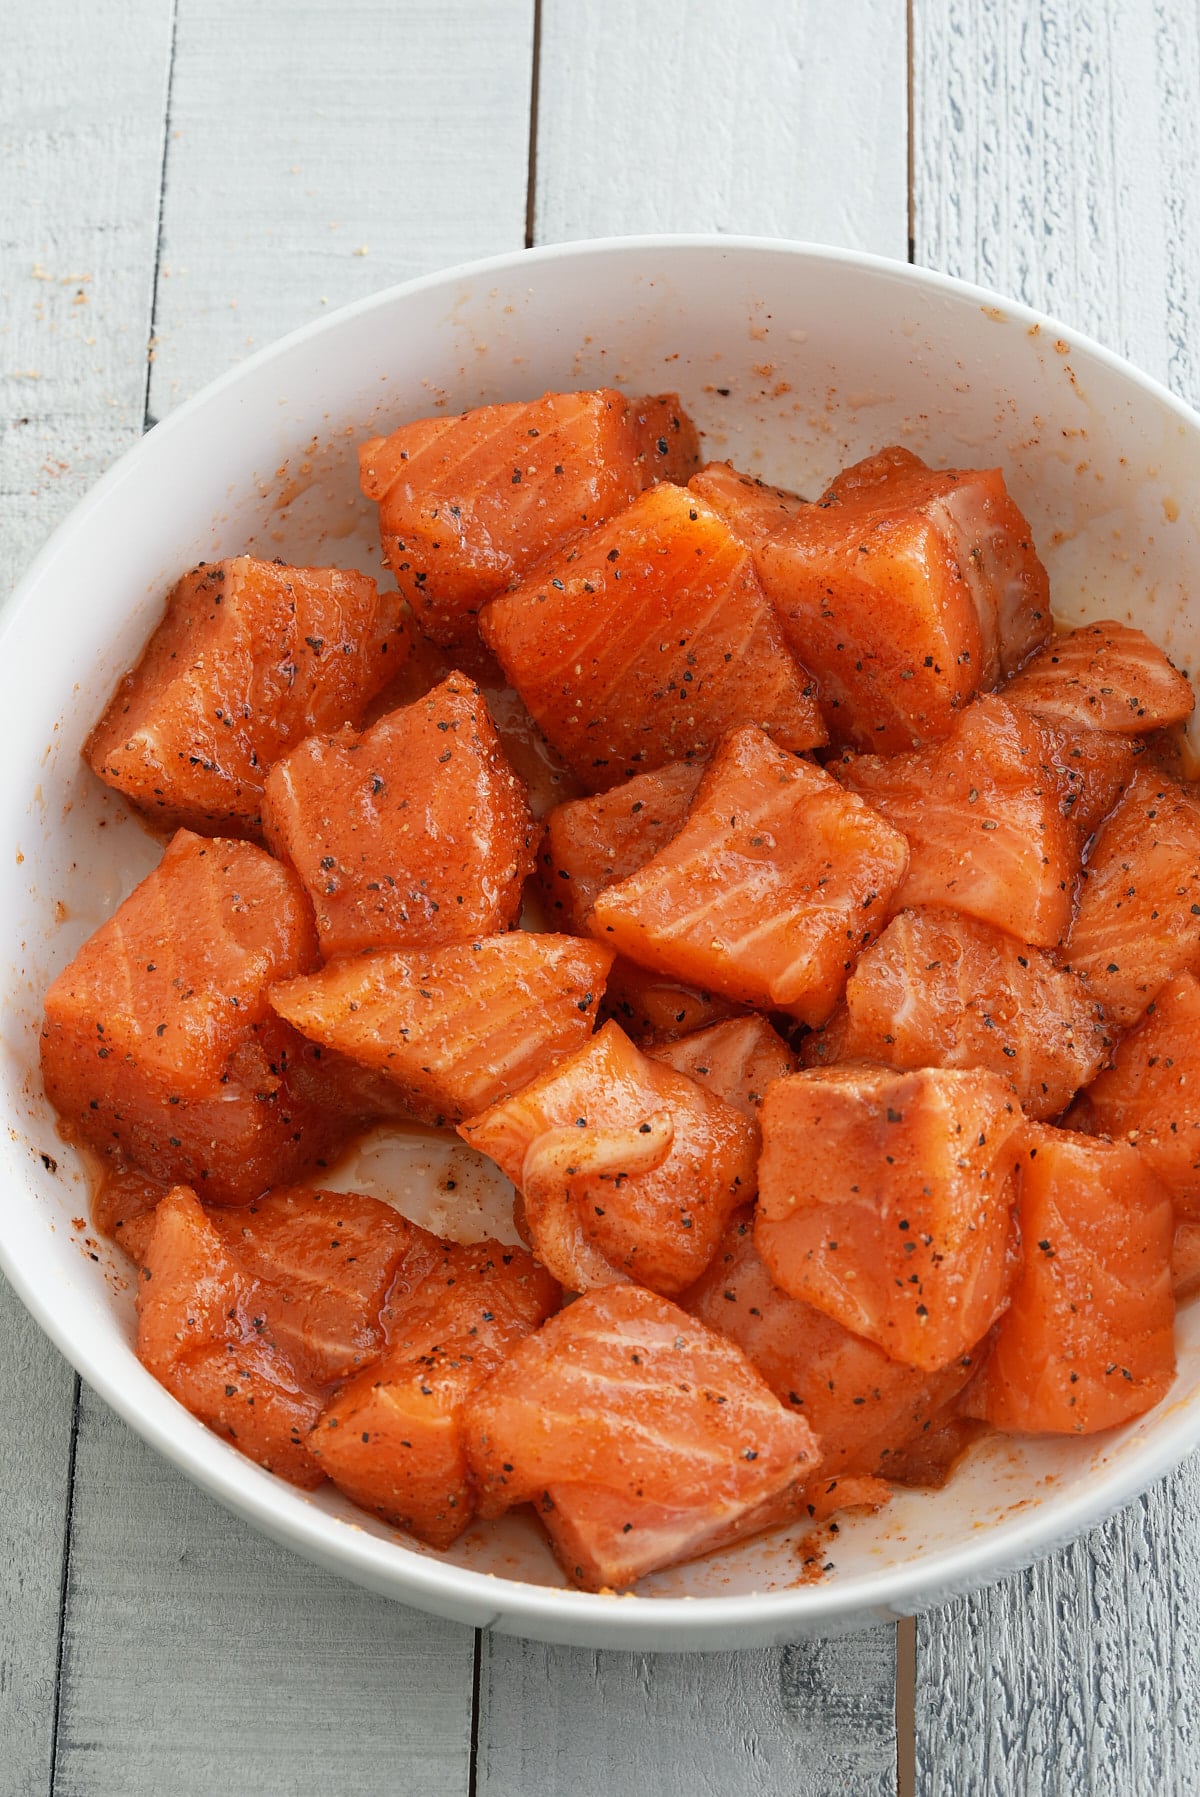 Cubes or raw salmon coated in salmon seasoning and oil.